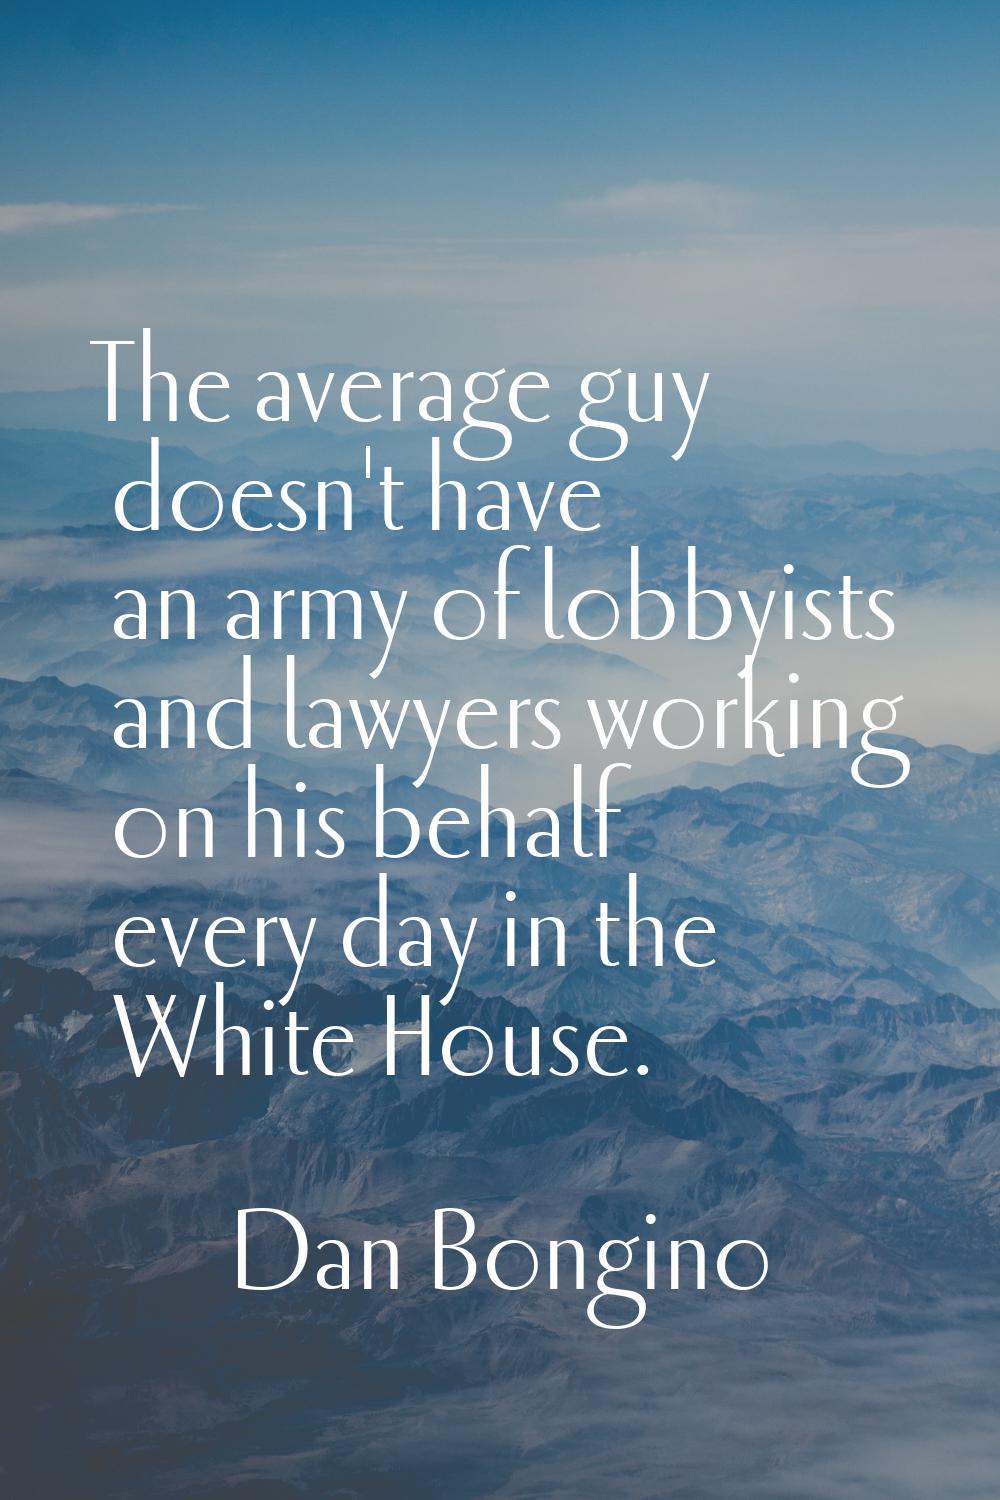 The average guy doesn't have an army of lobbyists and lawyers working on his behalf every day in th